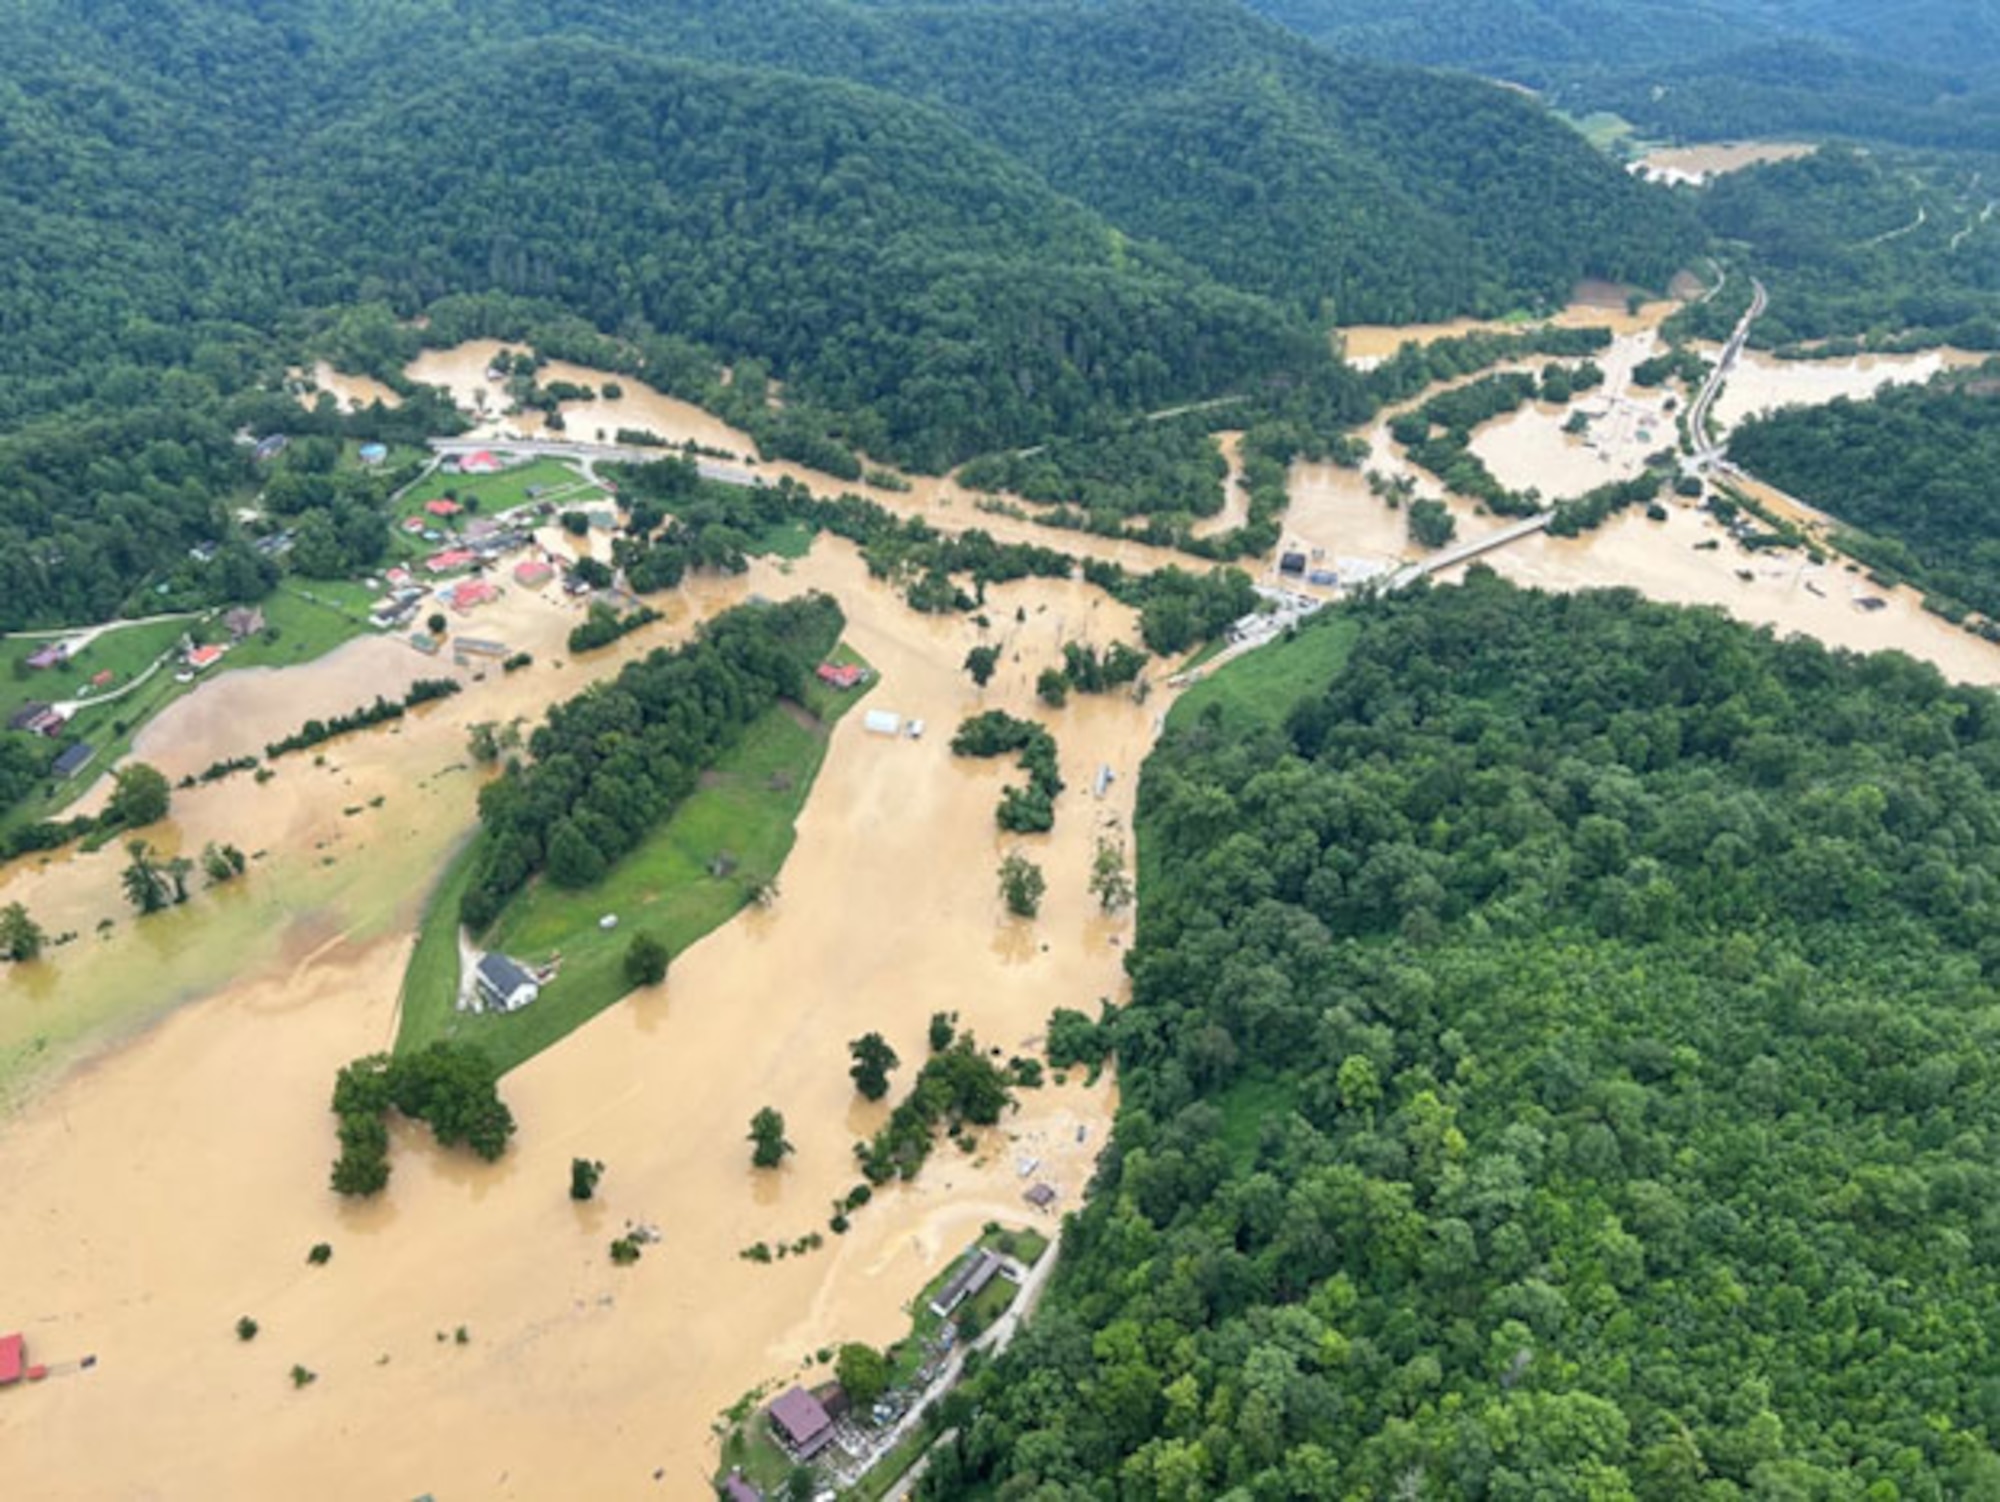 An aerial view of flash flooding in eastern Kentucky taken by Tennessee Army National Guard aircrew in a Black Hawk helicopter July 28, 2022. The Tennessee Guard sent five helicopters and crew to assist with rescue efforts.